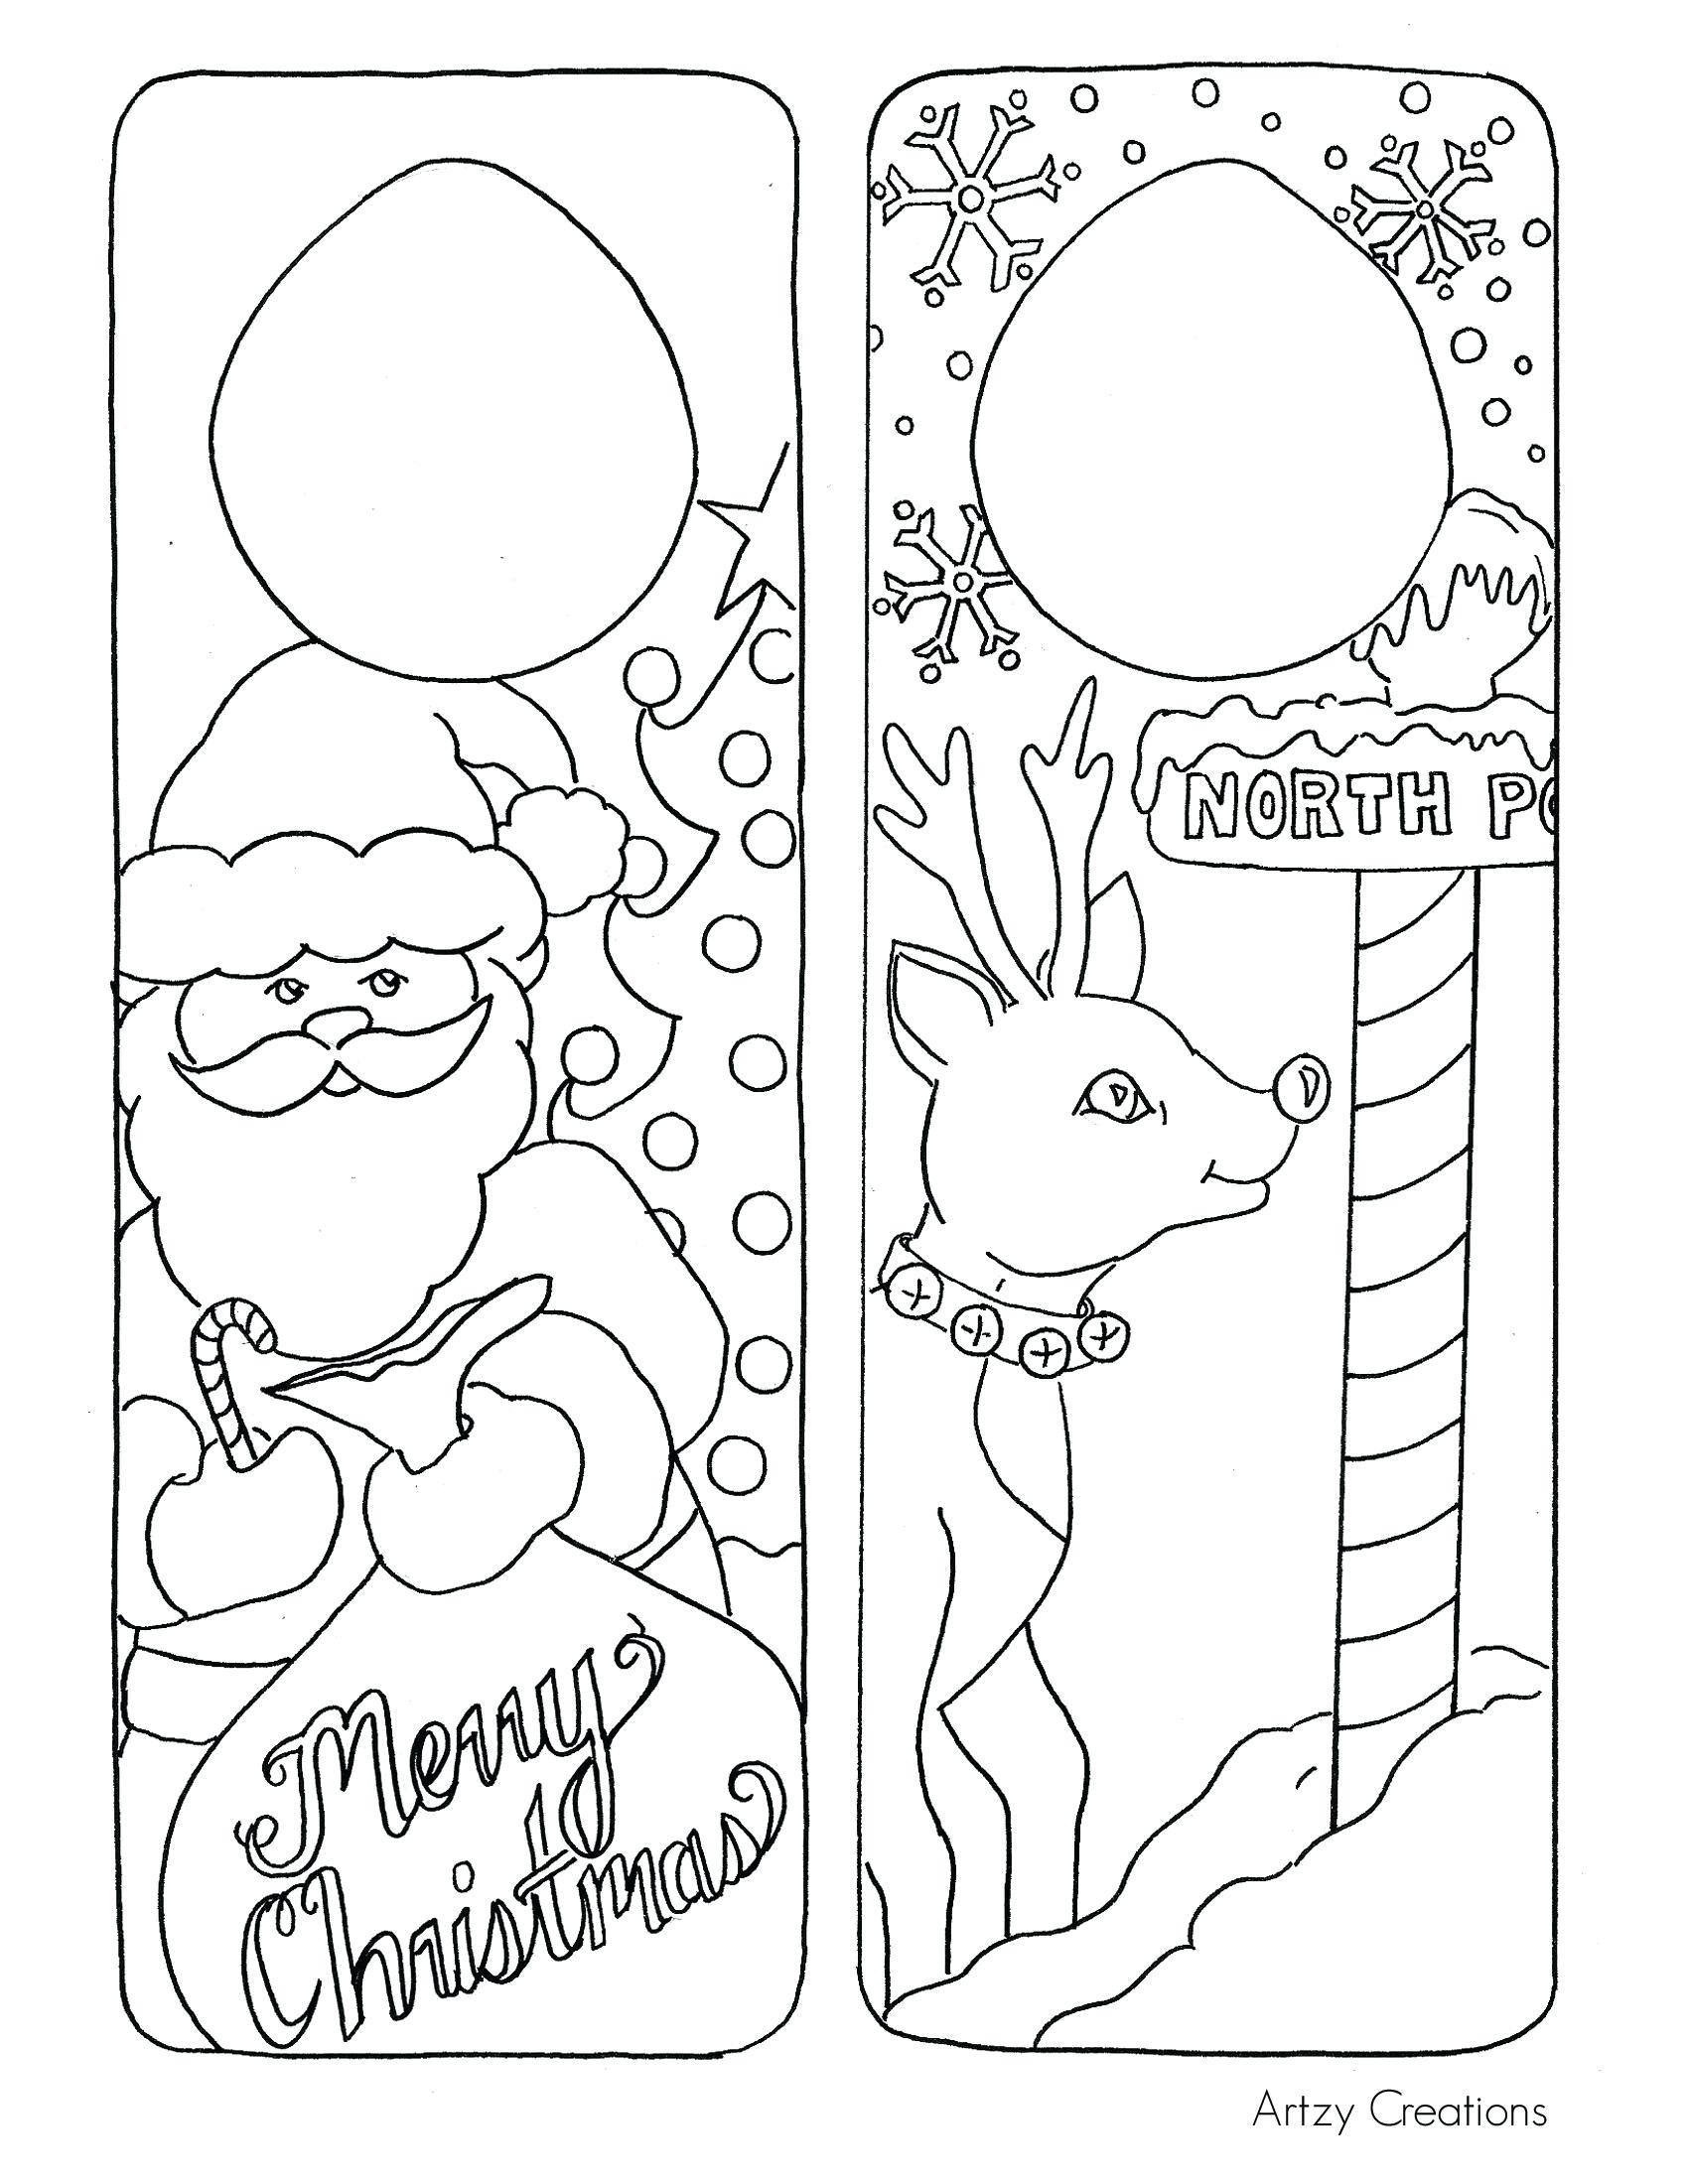 Christmas Card Coloring Pages at Free printable